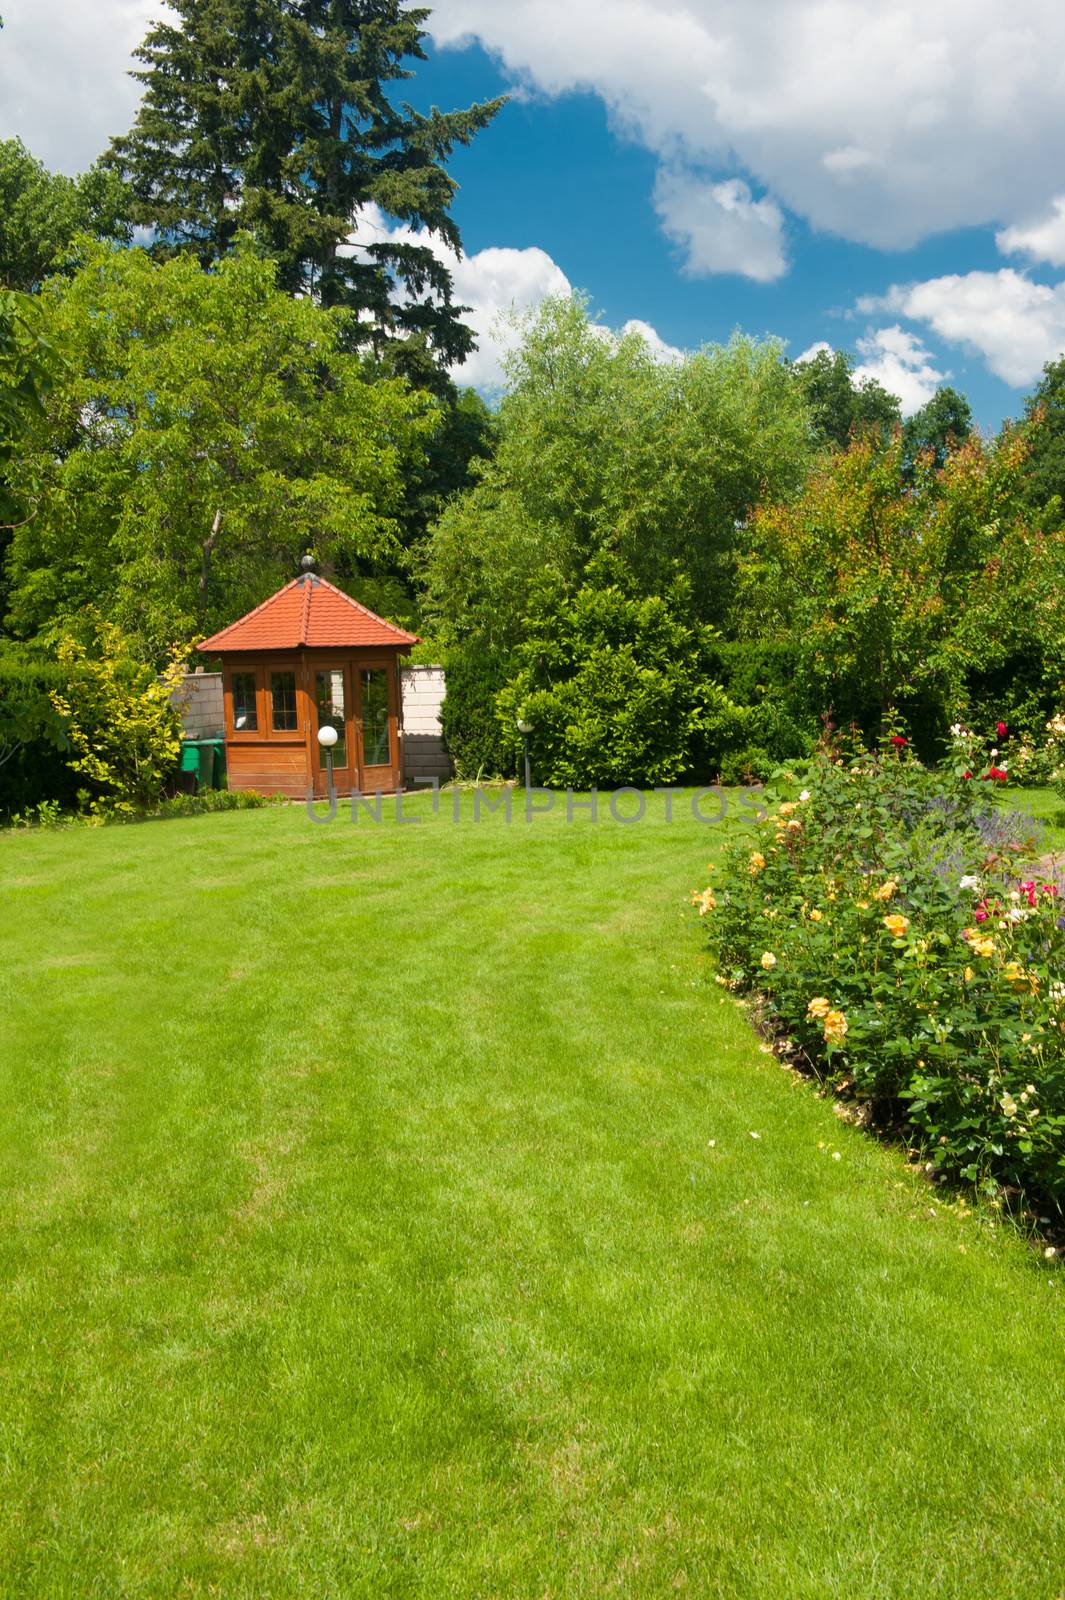 Beautiful garden with blooming roses and a small gazebo